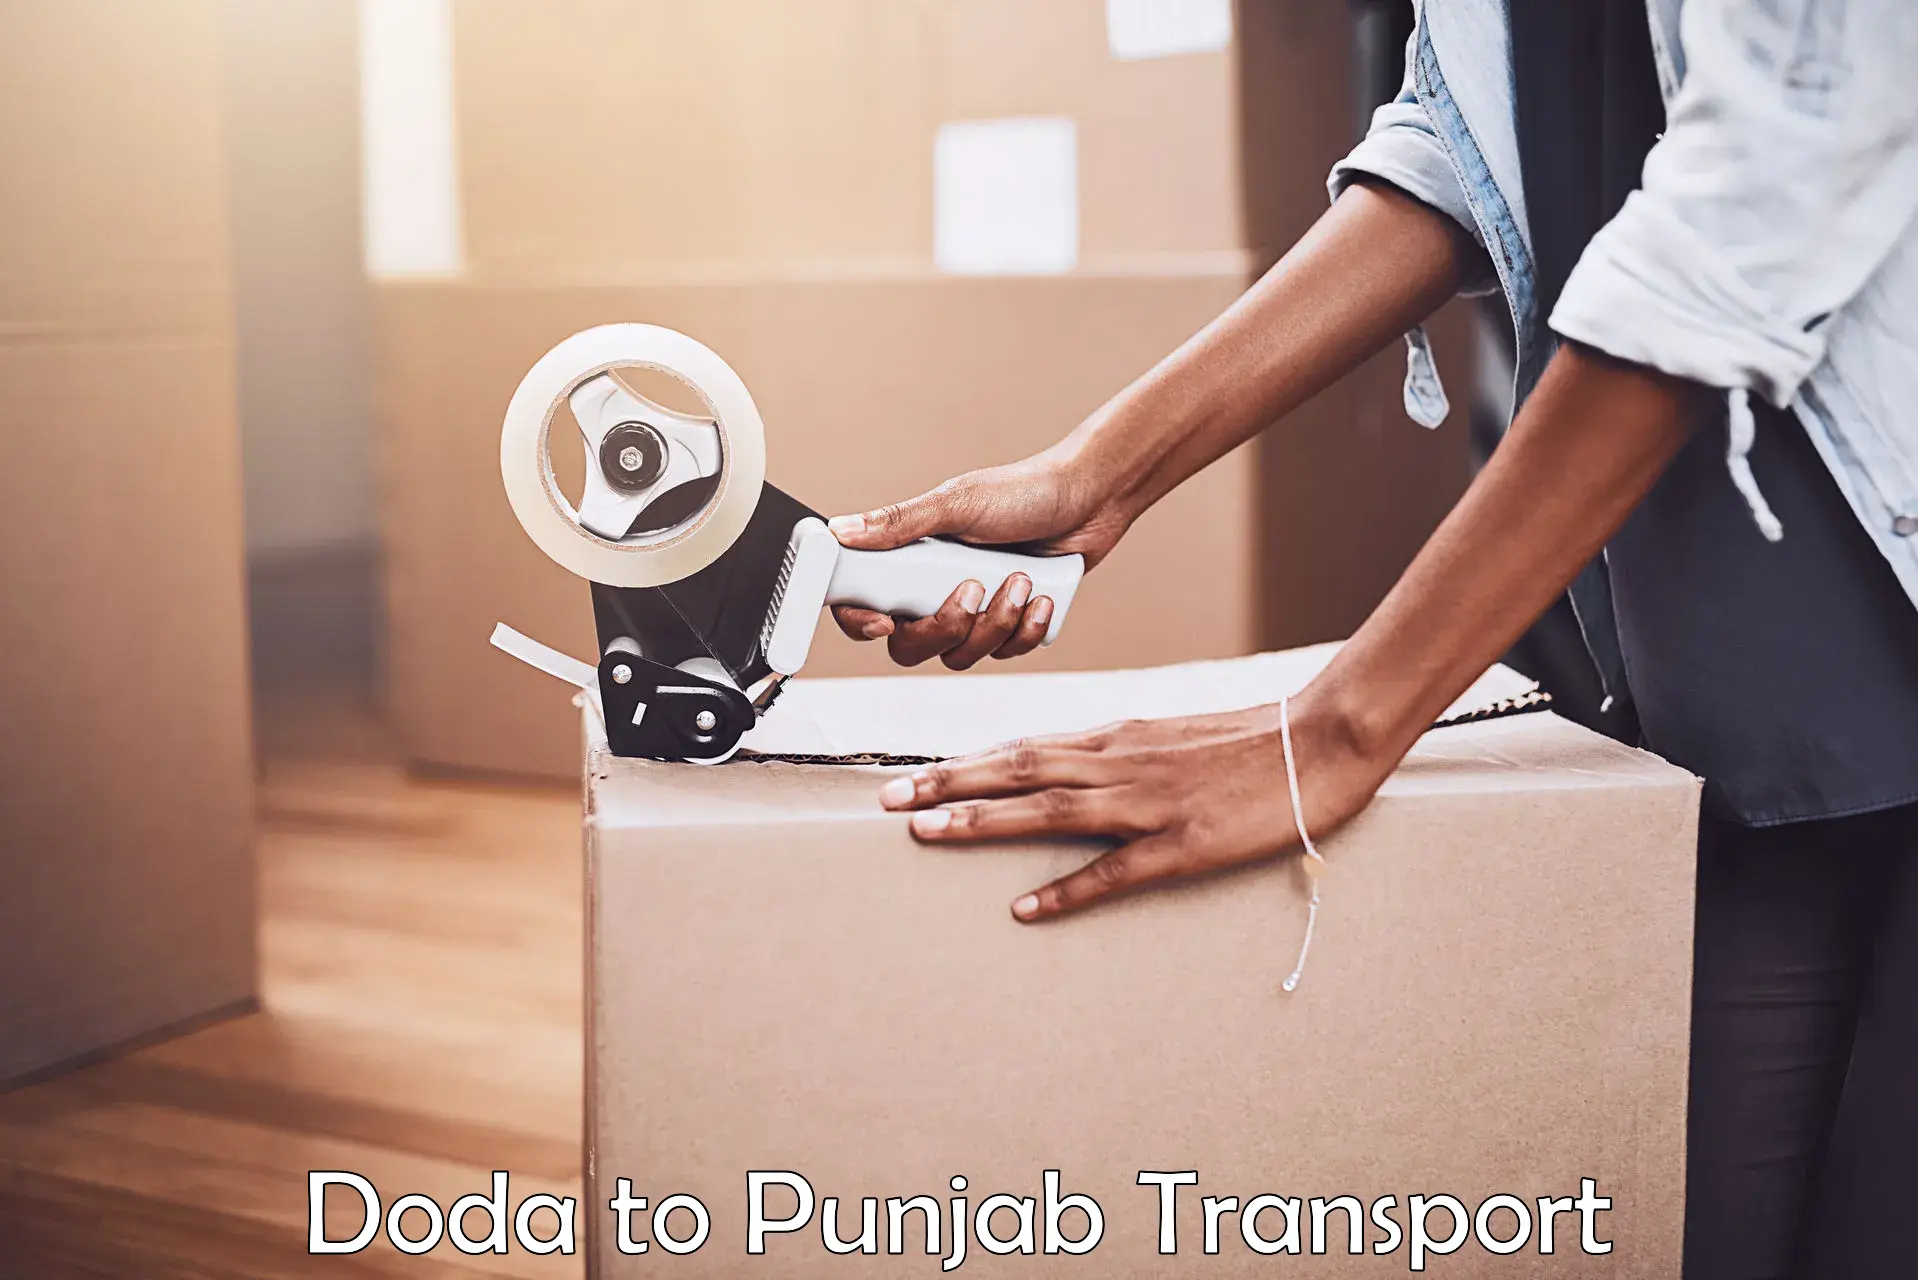 Furniture transport service Doda to Thapar Institute of Engineering and Technology Patiala